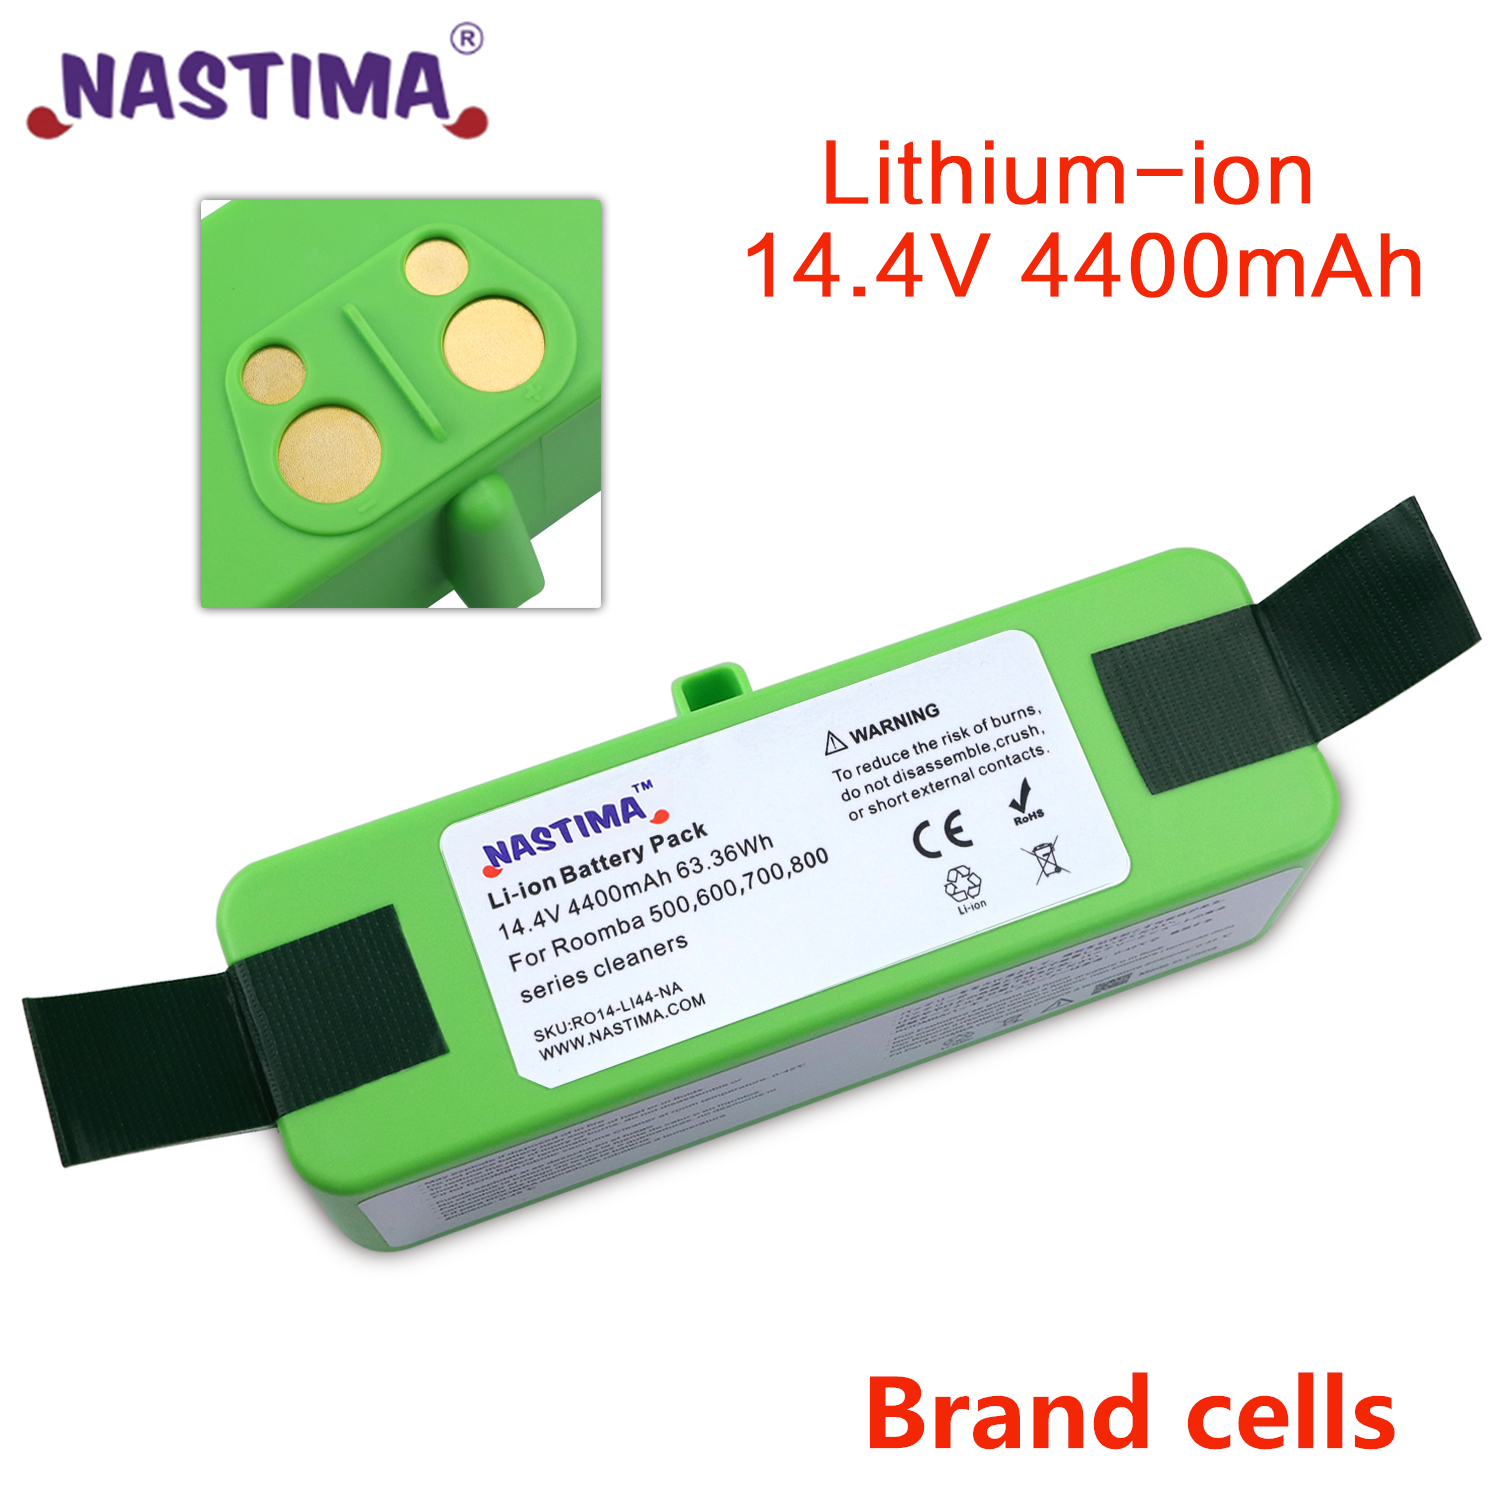 Bedrift Bøde elevation Nastima 4400mAh Li-ion Battery Compatible with iRobot Roomba R3 500 600 700  800 Series 500 550 560 620 650 675 760 770 780 870 - Price history & Review  | AliExpress Seller - Nastima Store | Alitools.io